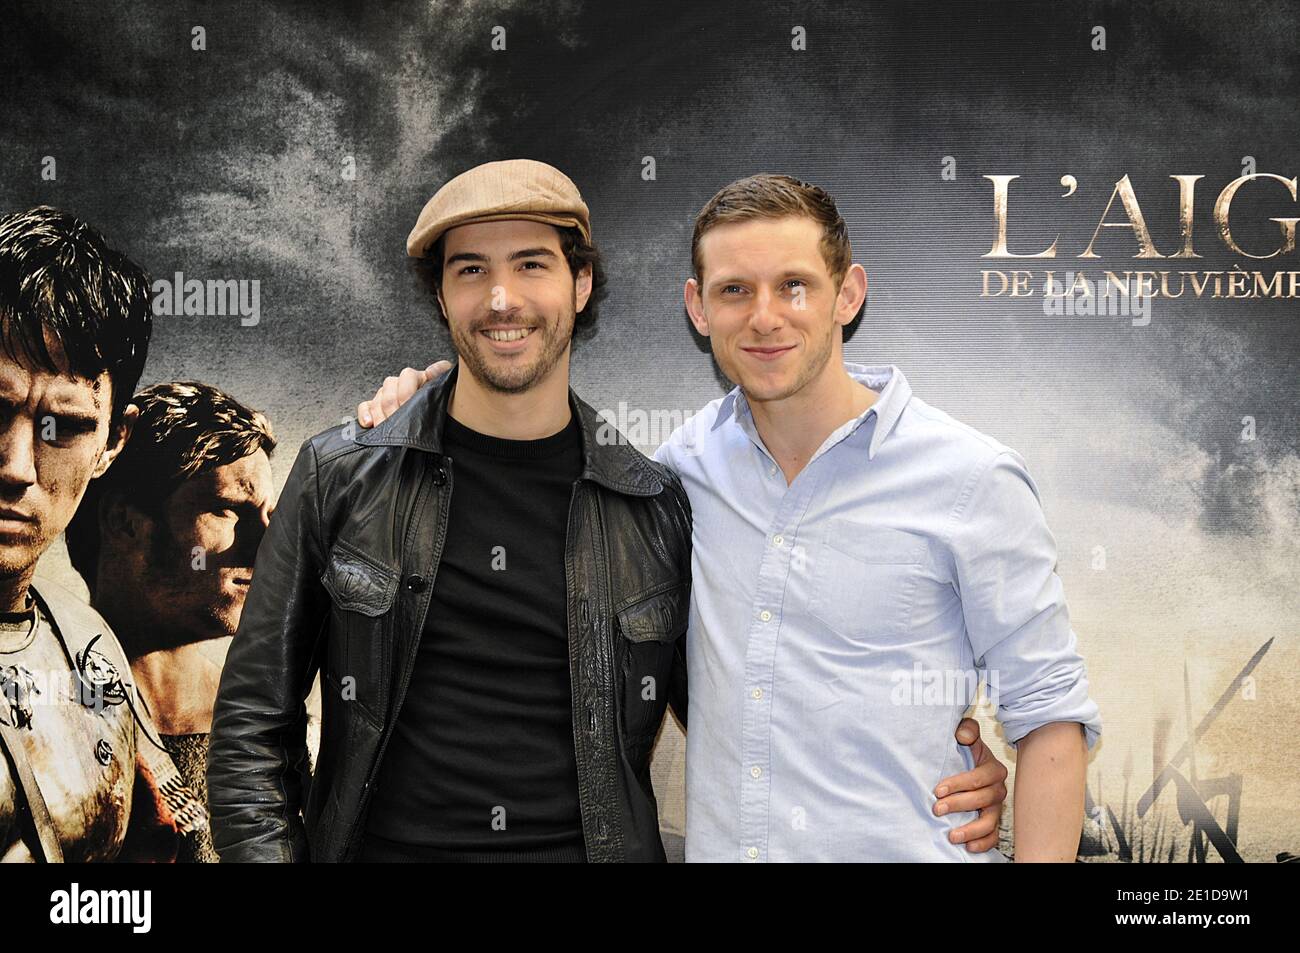 Bell and Tahar Rahim posing for a photocall for Kevin MacDonald's new movie ' The Eagle' (L'aigle de la neuvieme Legion) at the Royal Monceau hotel in Paris, France